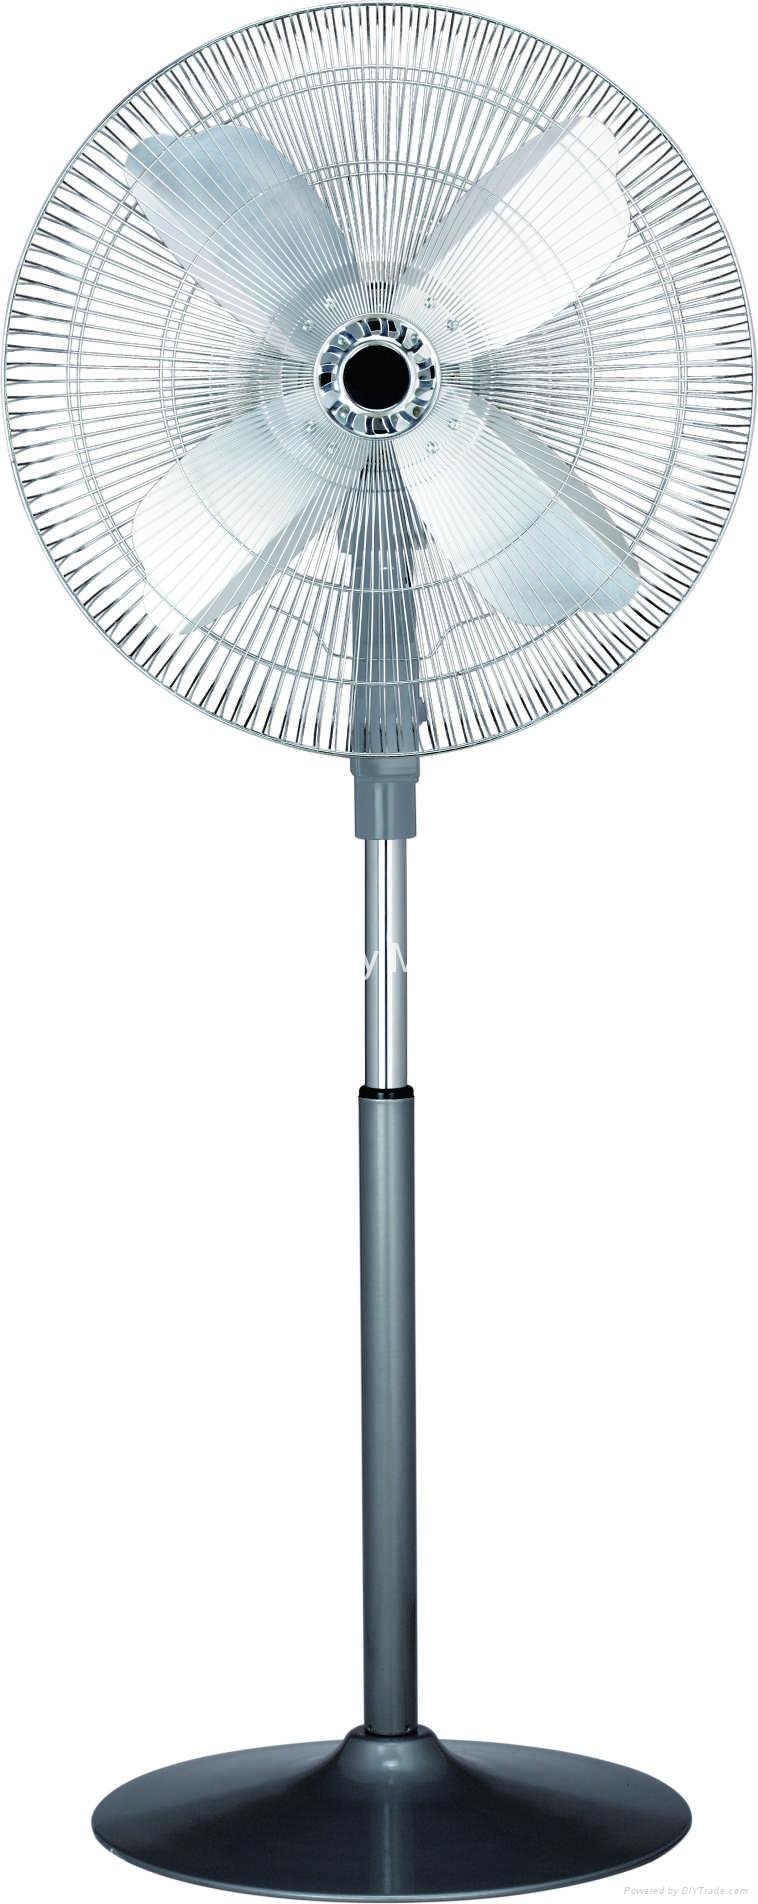 20" DC12V BLDC Stand Fan for Pakistand Market 2